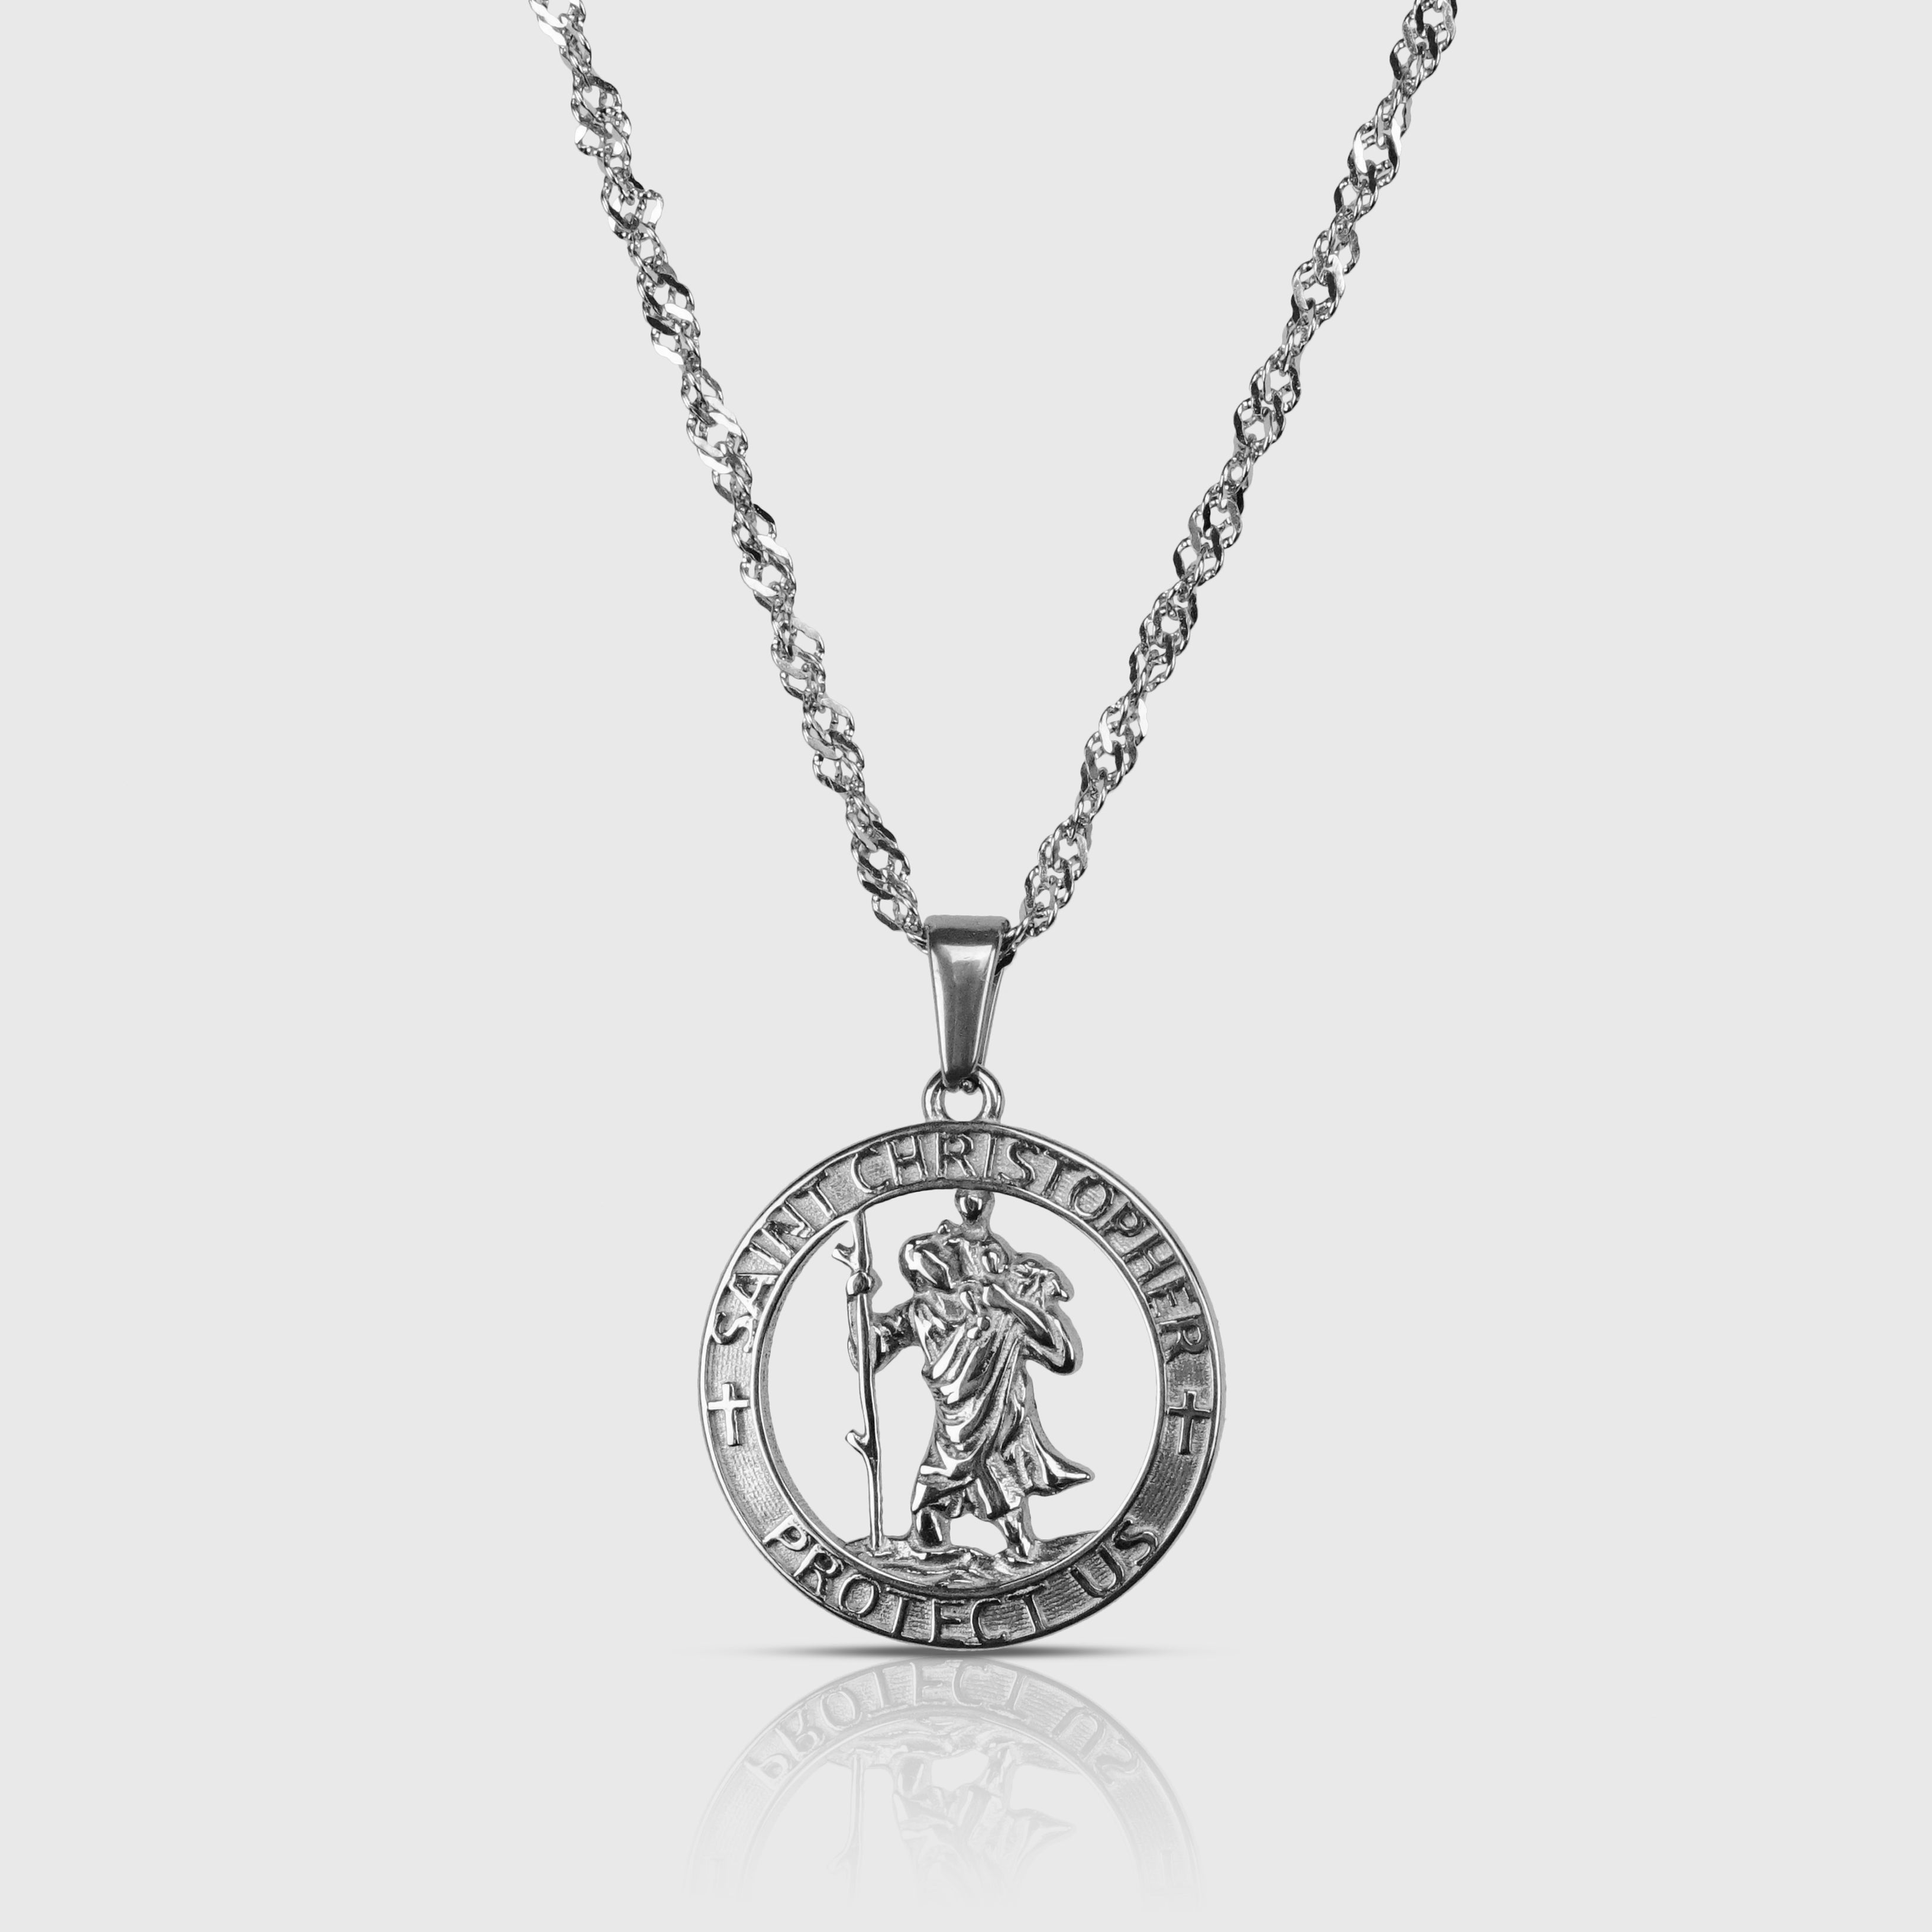 ST. CHRISTOPHER NECKLACE - SILVER